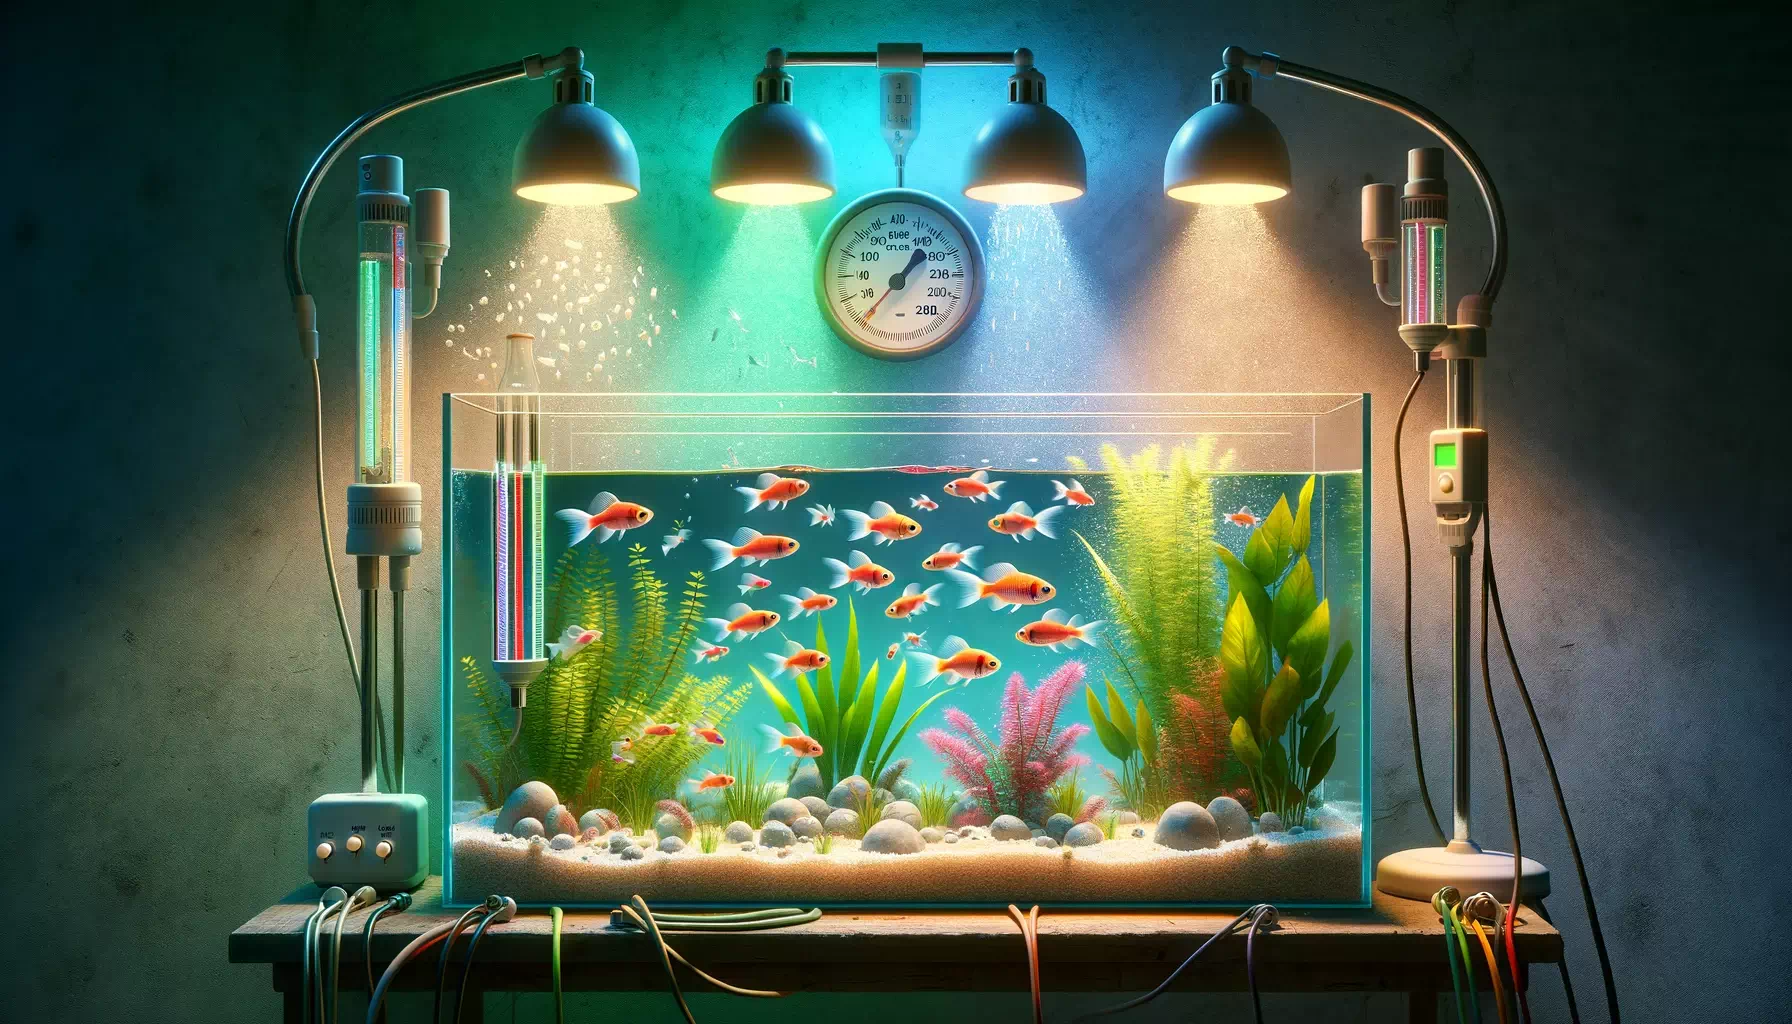 depicting GloFish adapting to environmental changes in their aquarium habitat. The scene should include elements that